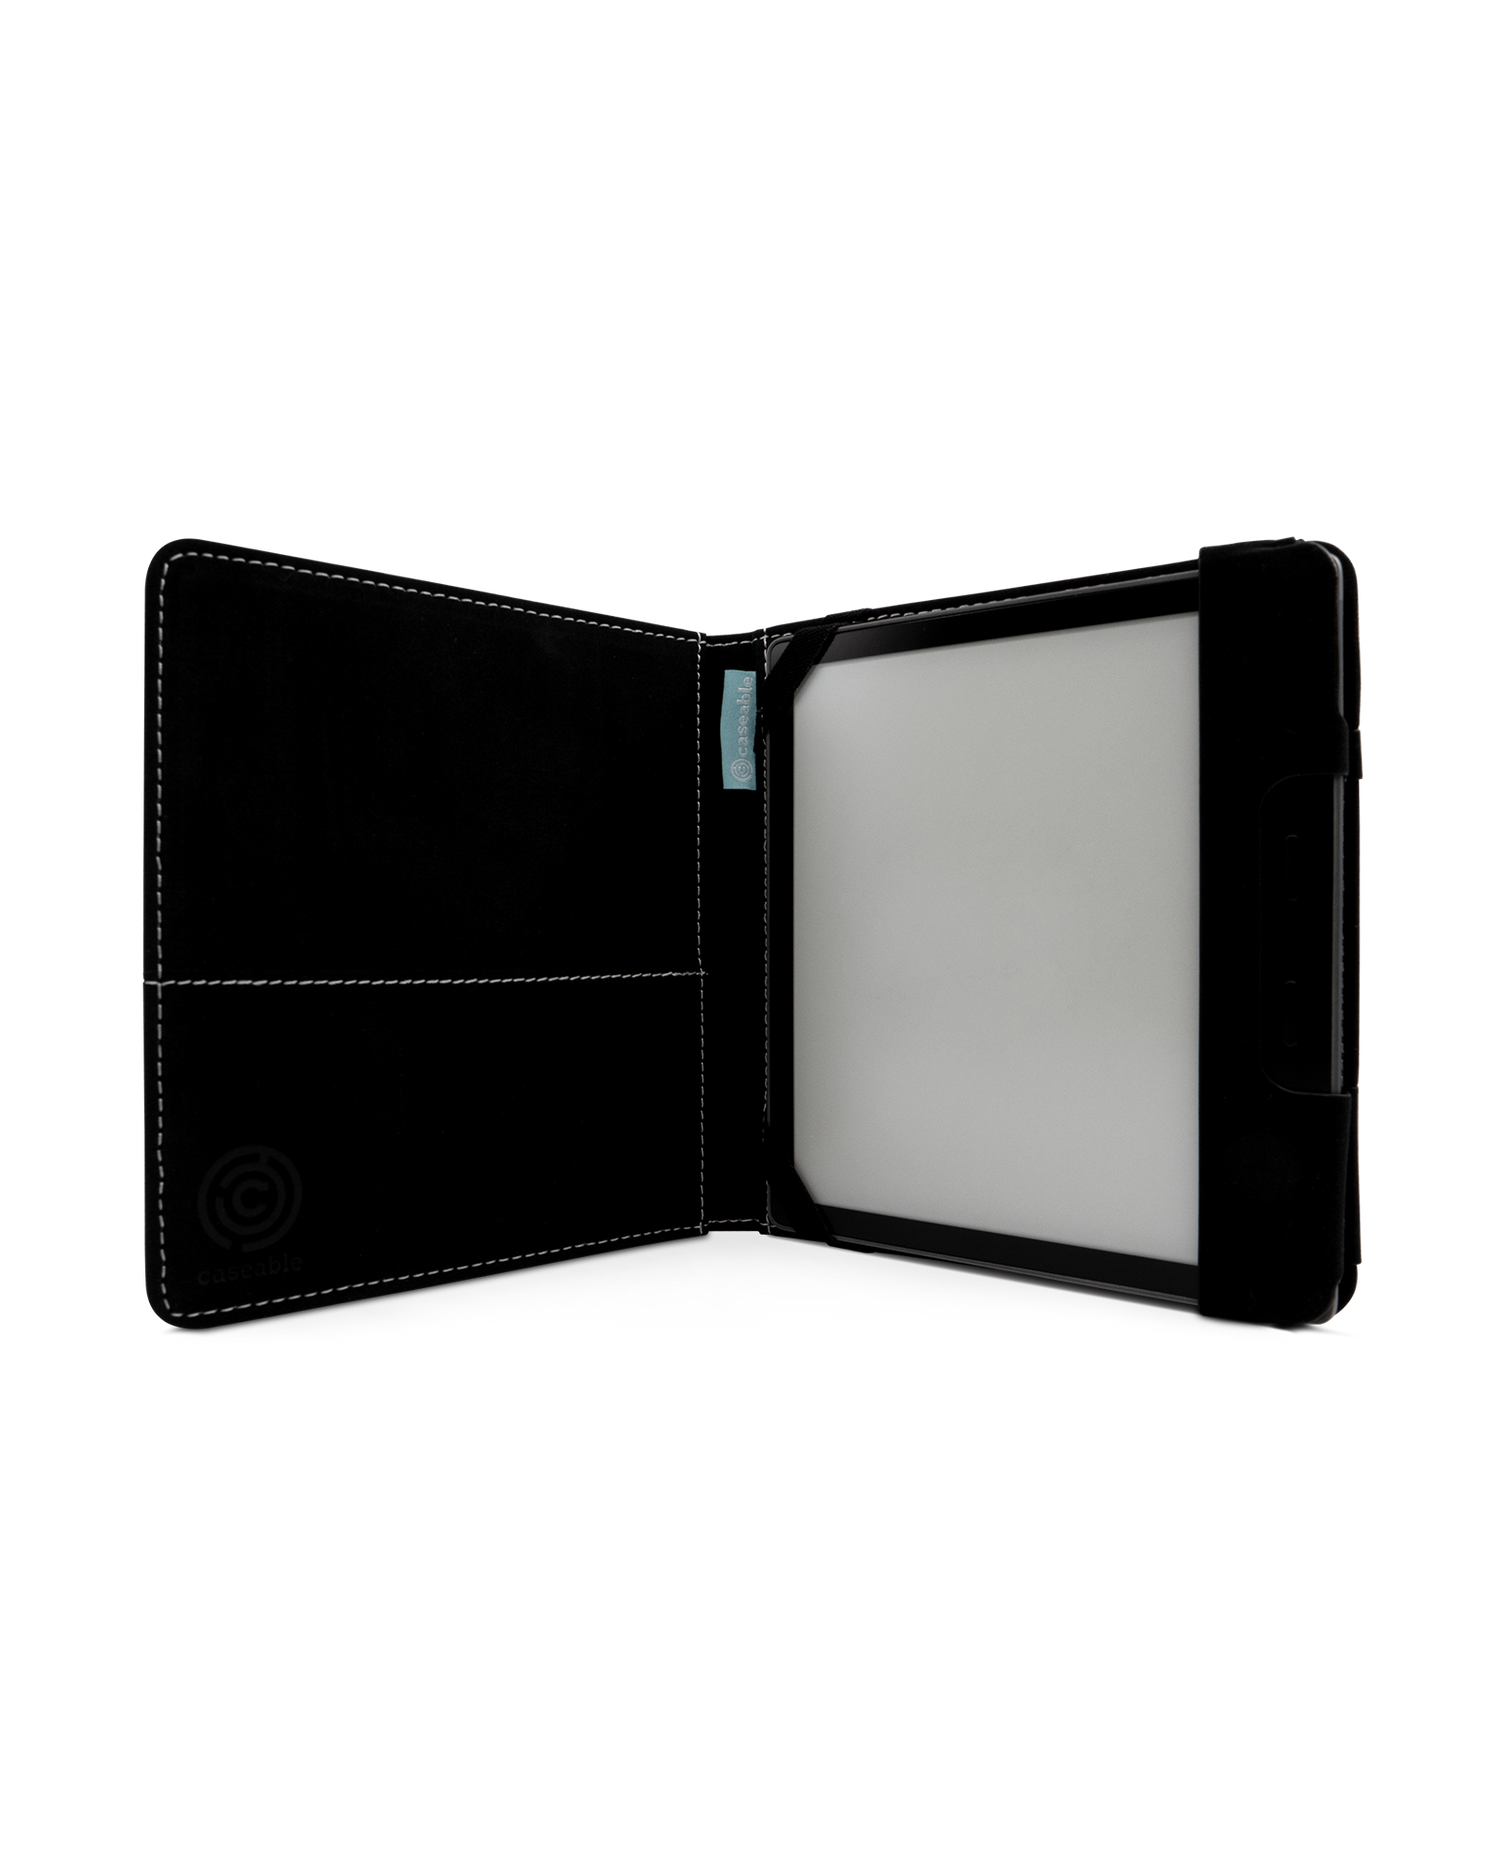 Fall Fog eReader Case for tolino vision 6: Opened interior view